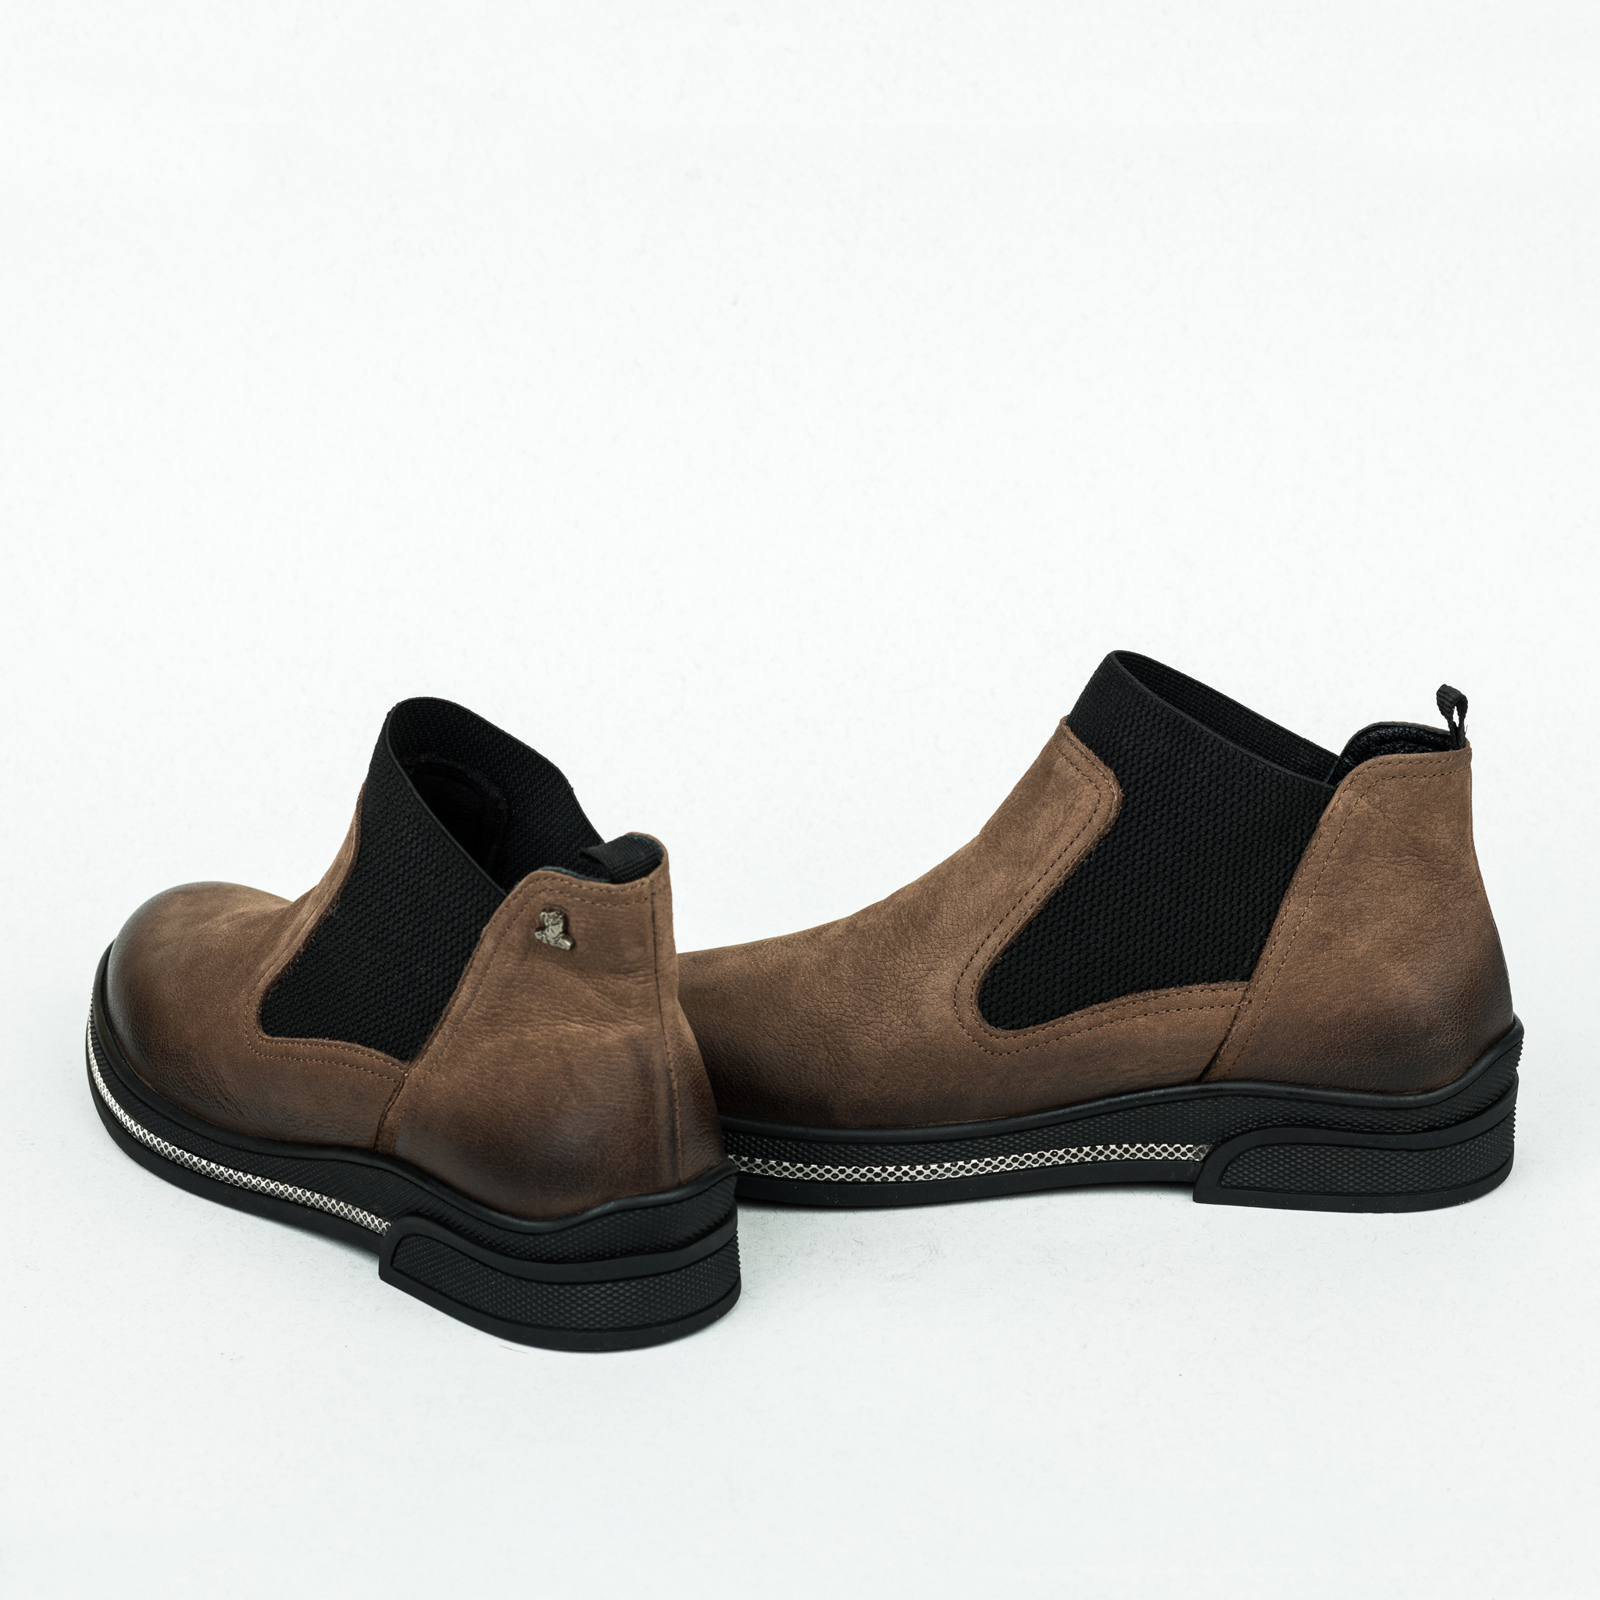 Leather ankle boots B211 - BROWN